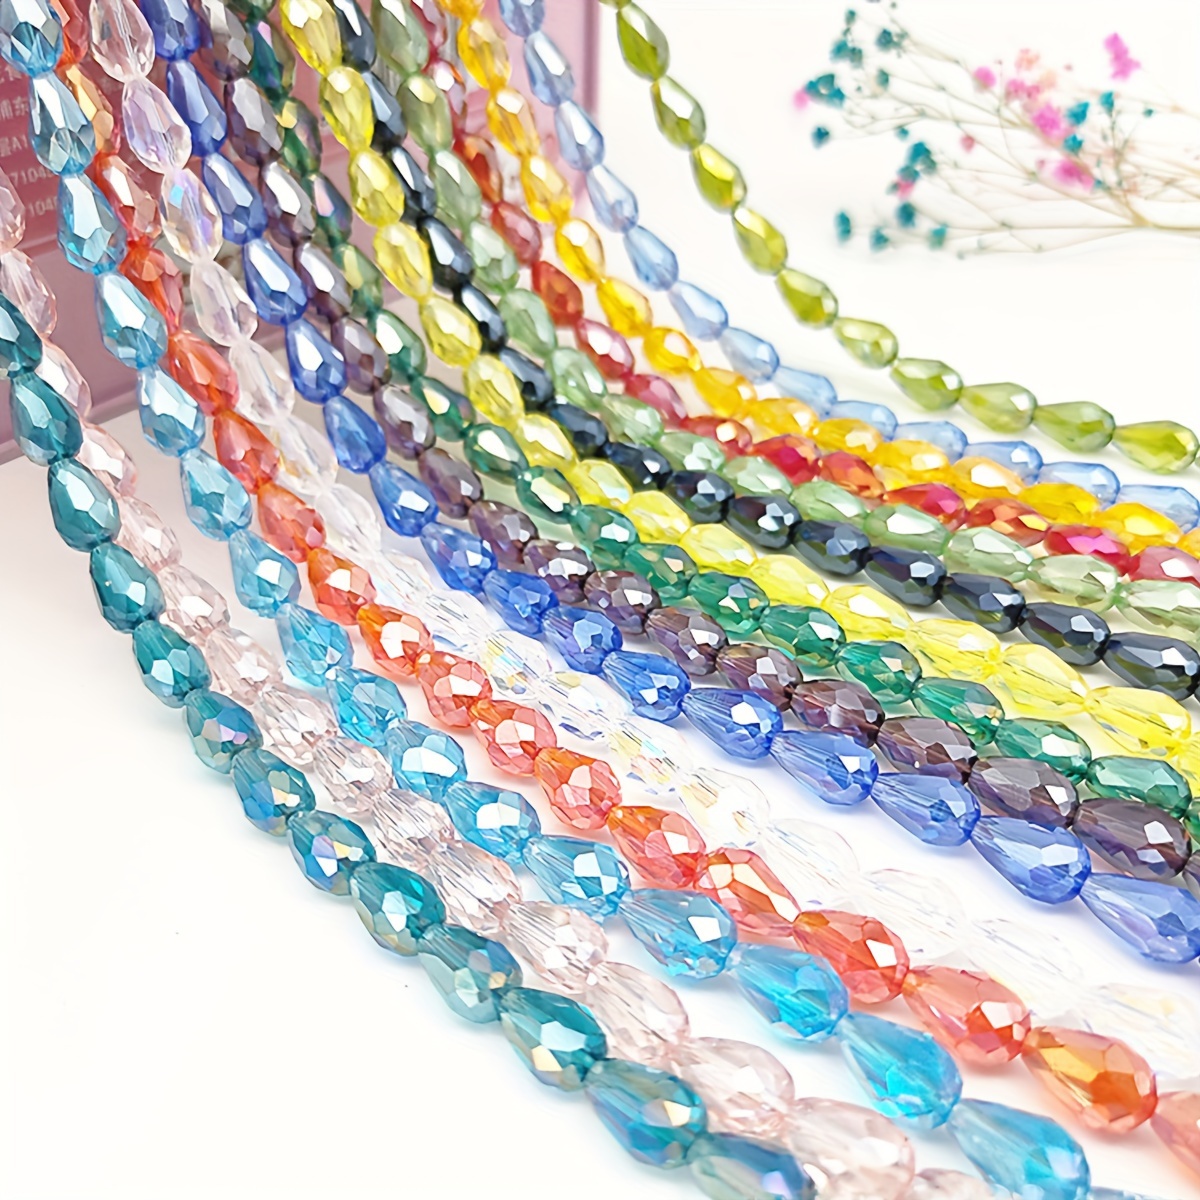 15 Colors 750Pcs/Box Faceted Glass Crystal Beads Bulk-6MM Round Ball Glass  Beads Loose Beading for DIY Jewelry Beads Accessories